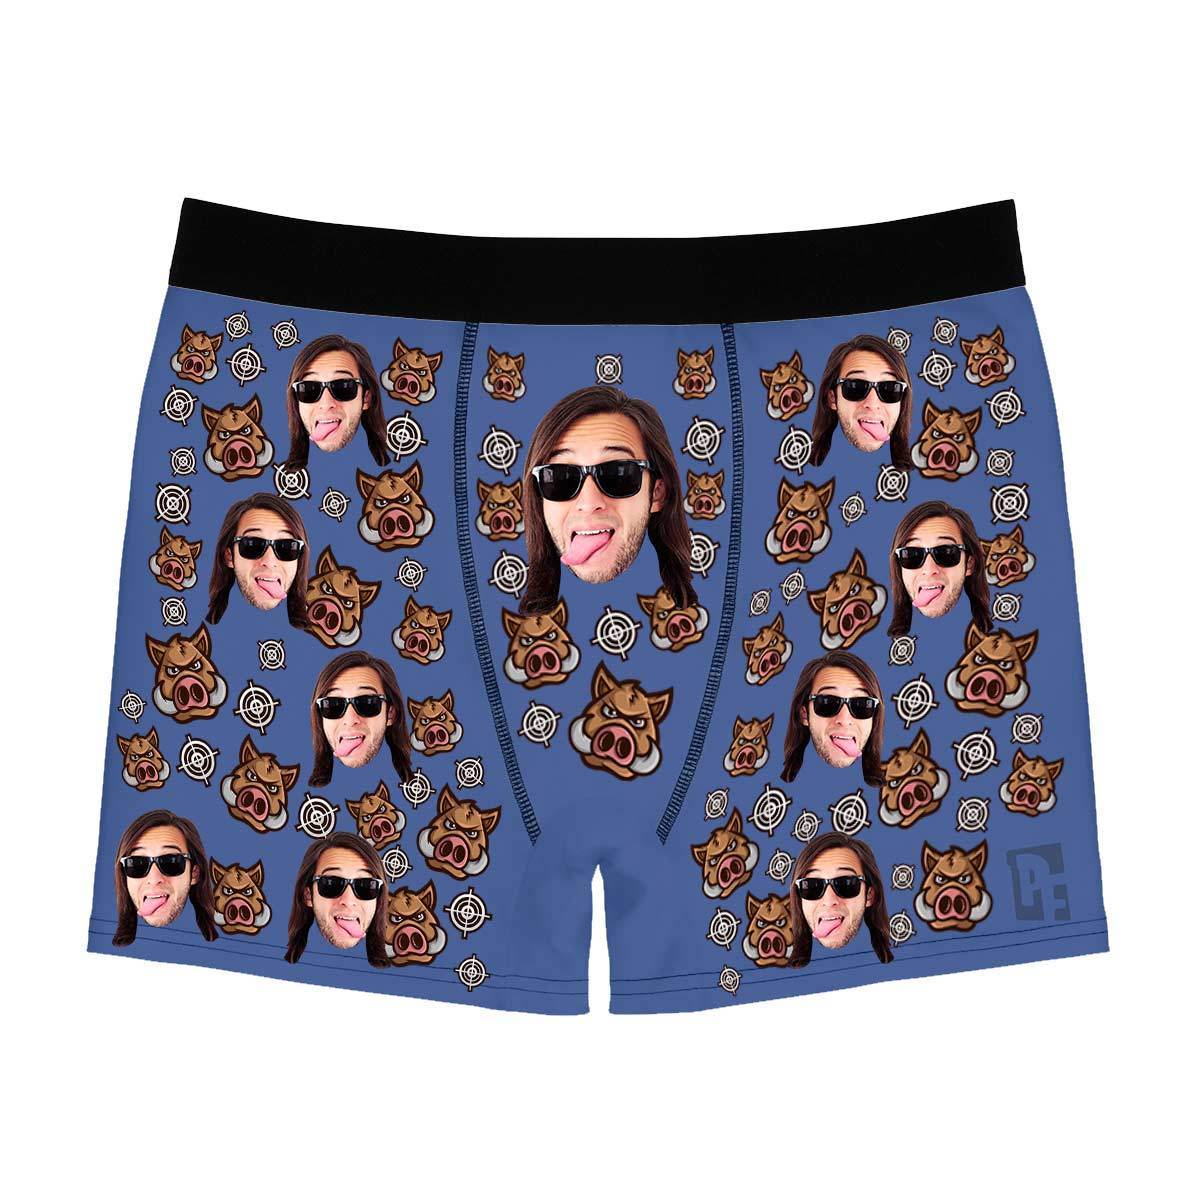 Darkblue Boar Hunter men's boxer briefs personalized with photo printed on them